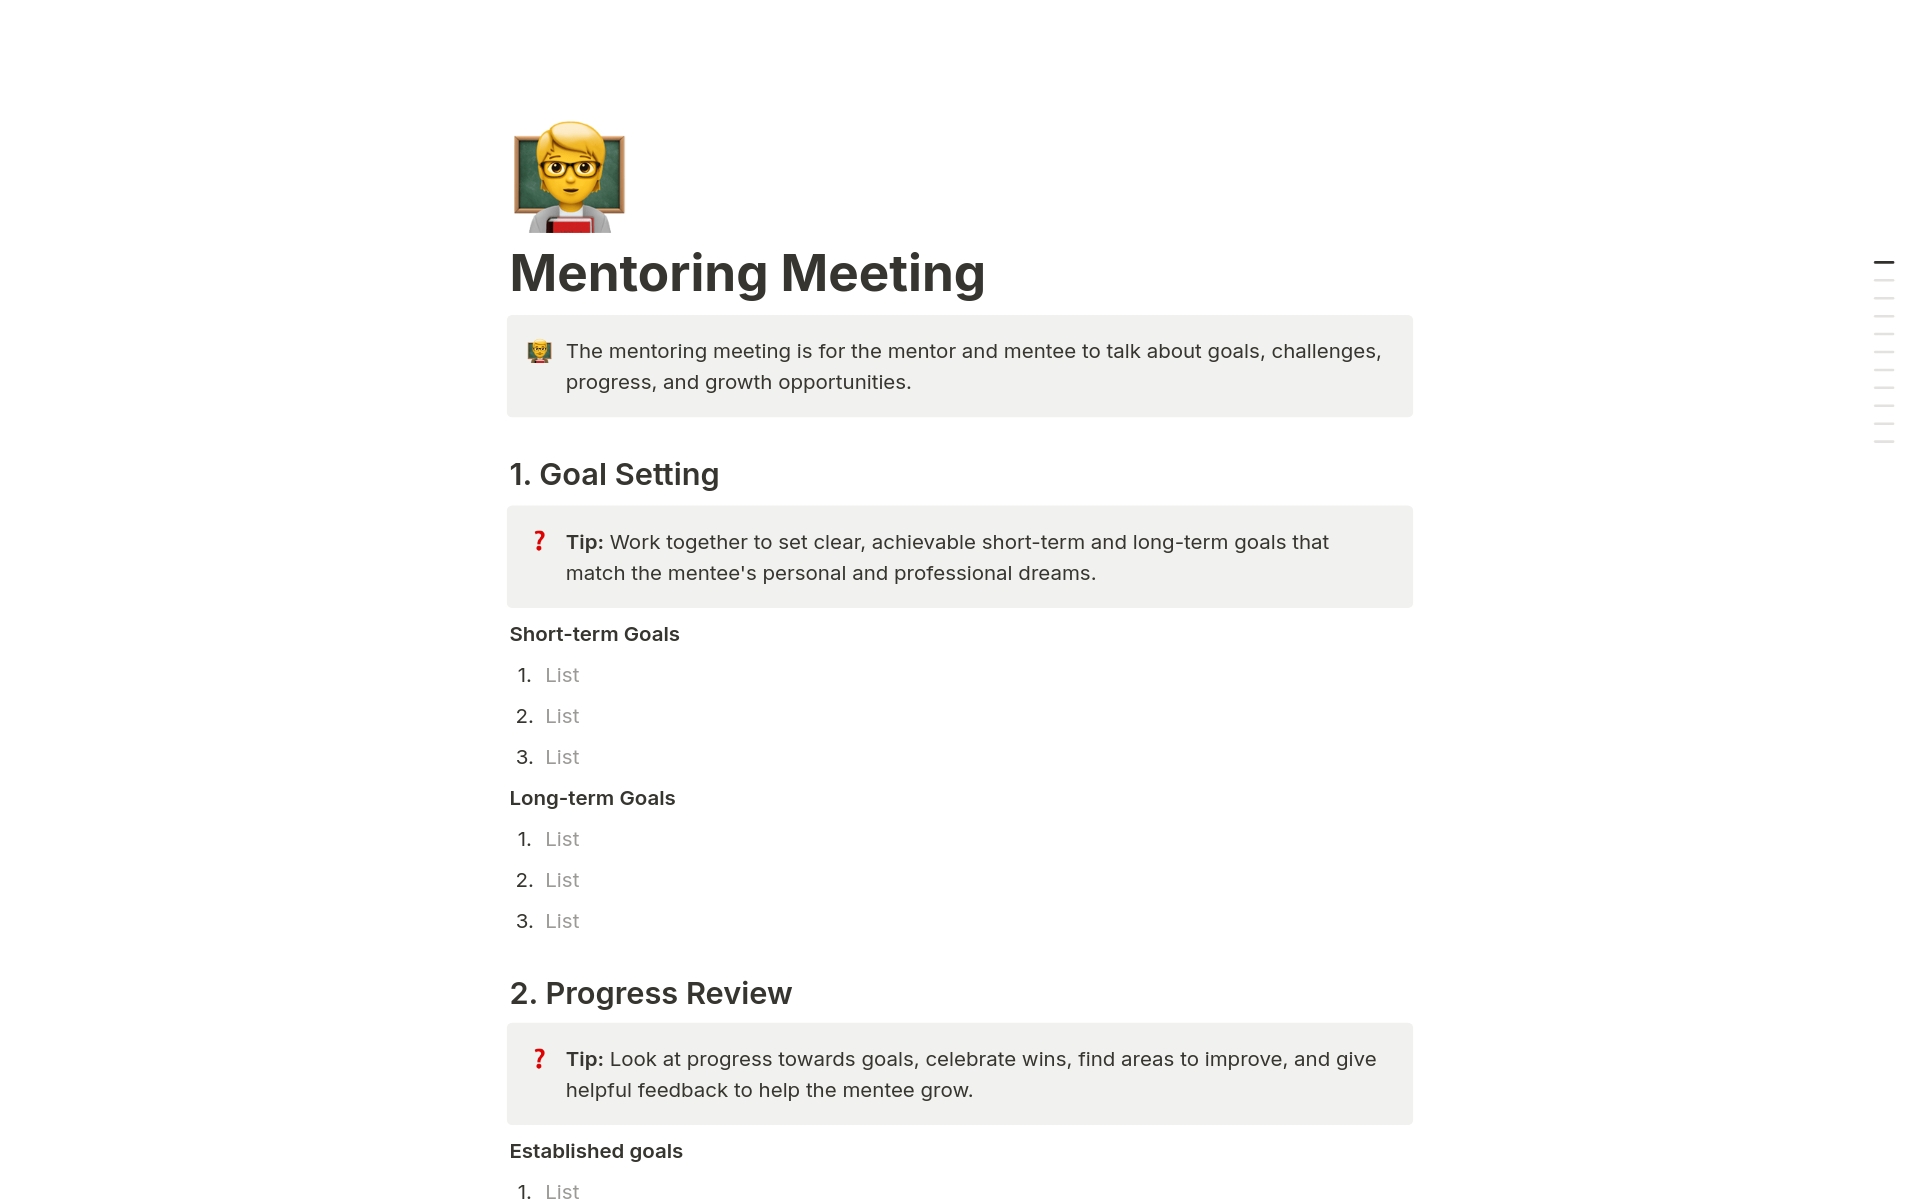 The mentoring meeting is for the mentor and mentee to talk about goals, challenges, progress, and growth opportunities.